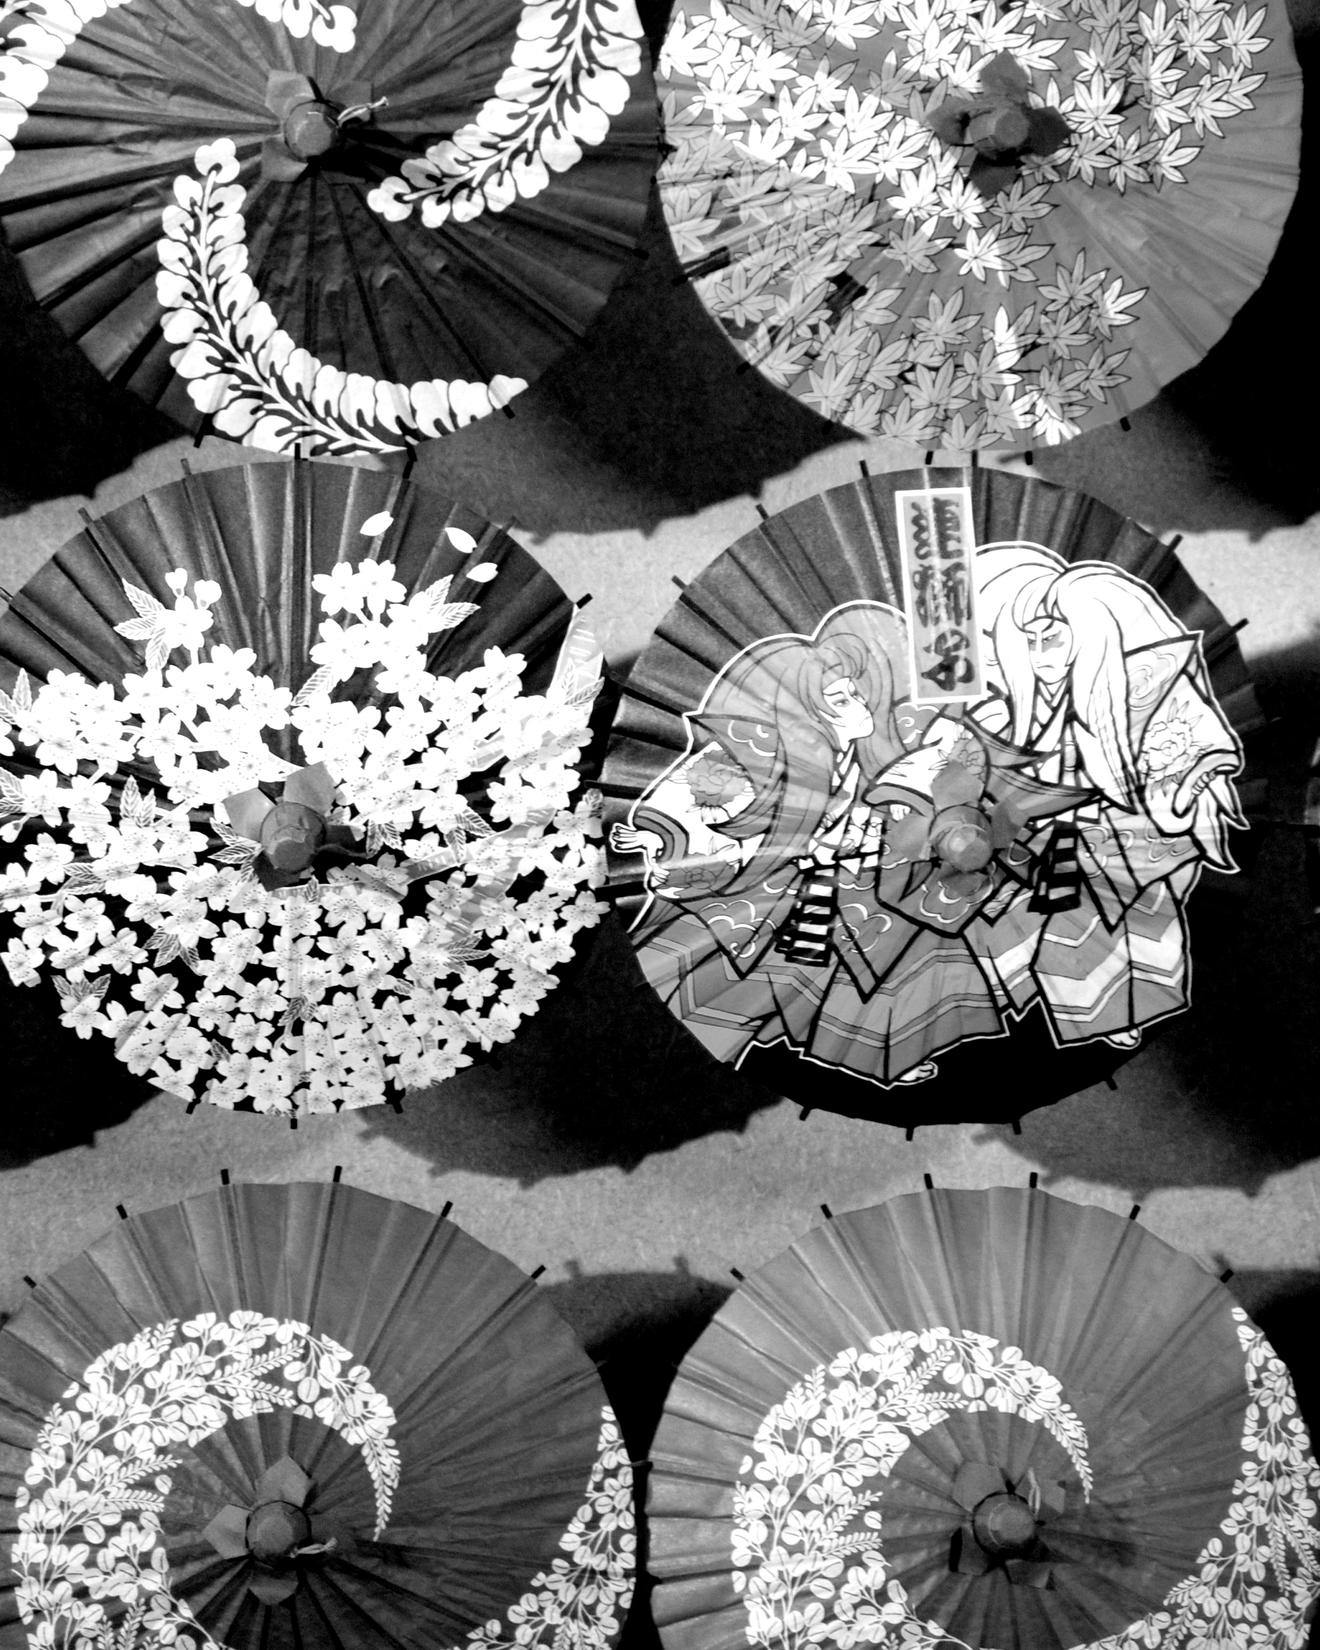 Black and white image of decorative Wagasa or umbrellas in Japan